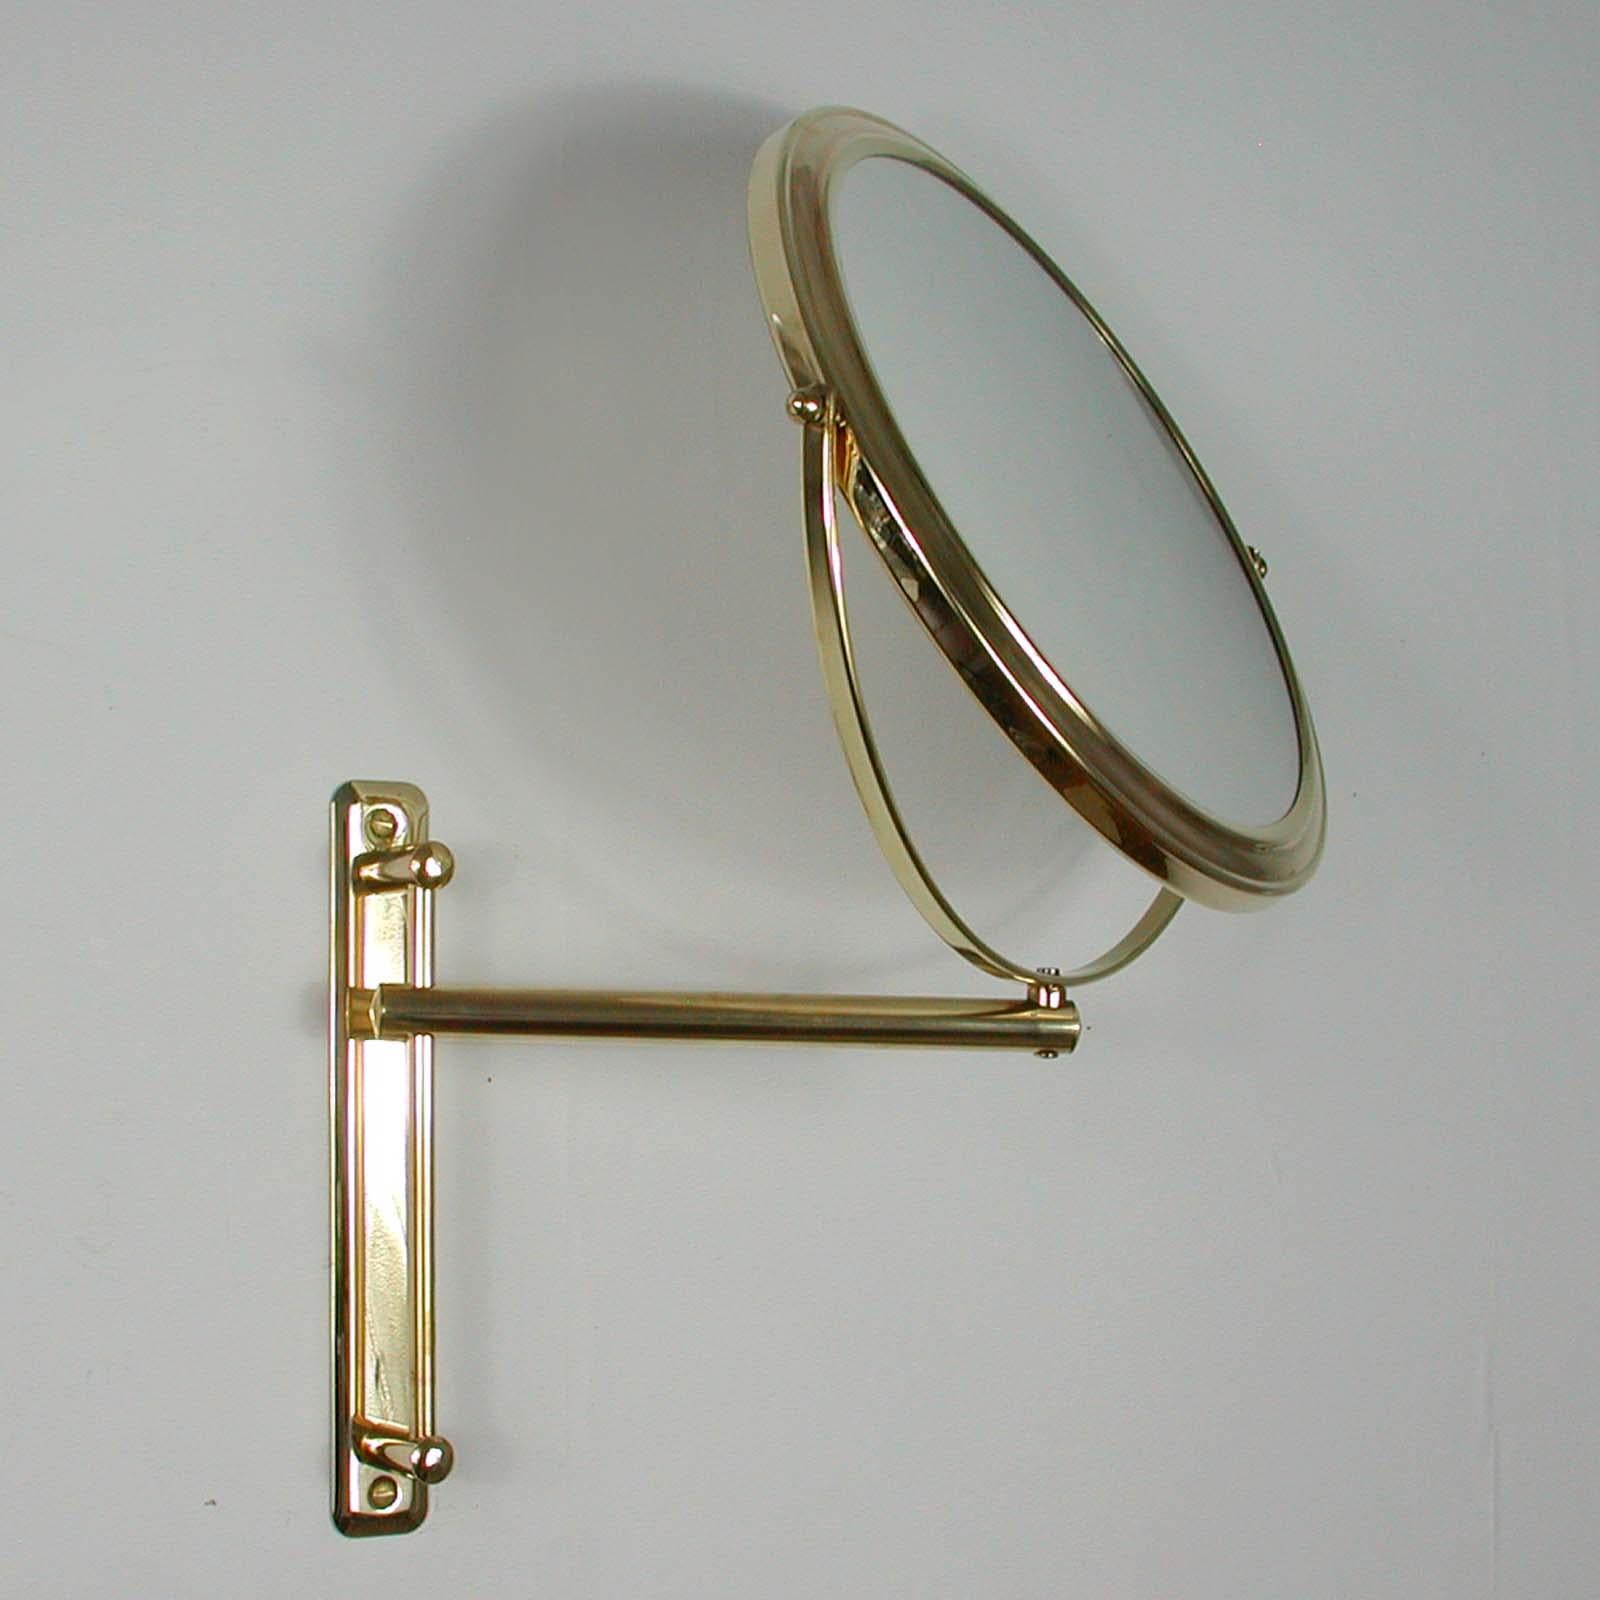 Italian Articulating and Adjustable Brass Vanity 2-Sided Wall Mirror, 1950s For Sale 6